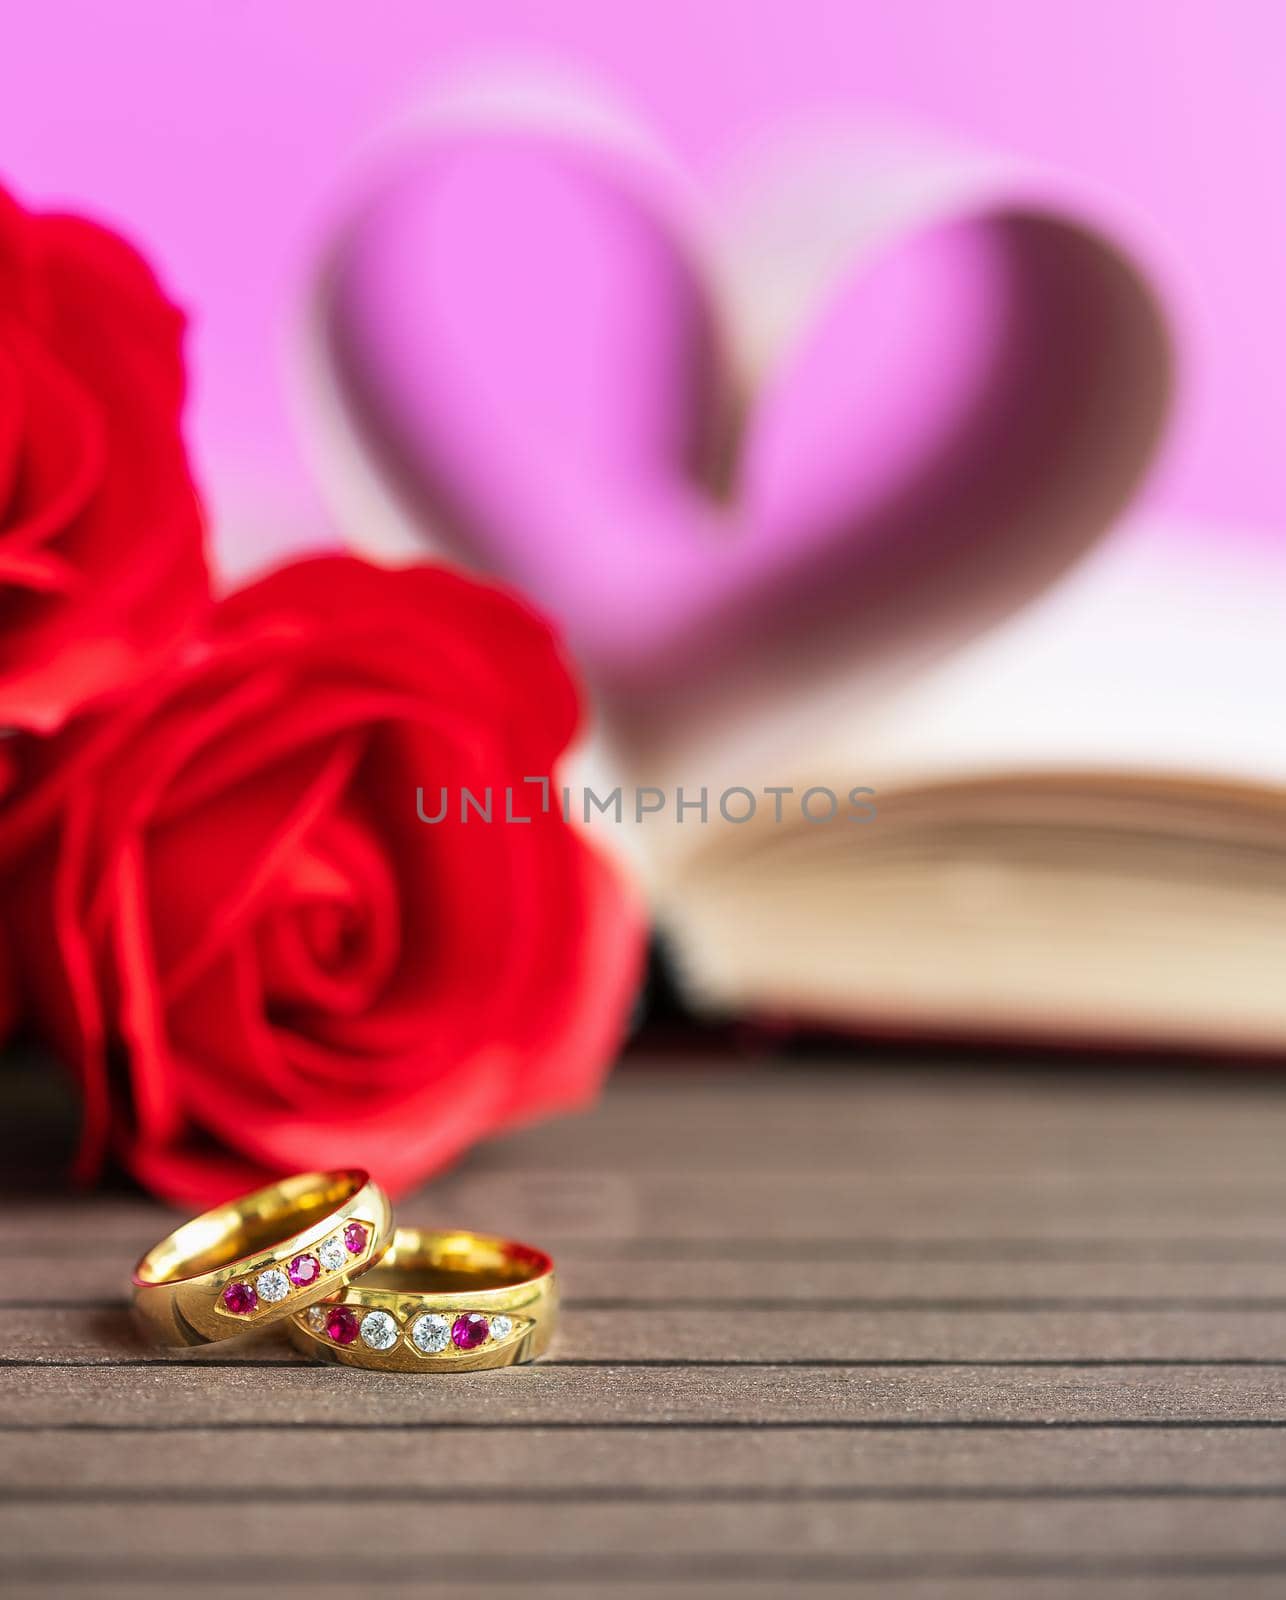 Pages of book curved  heart shape with wedding ring by stoonn